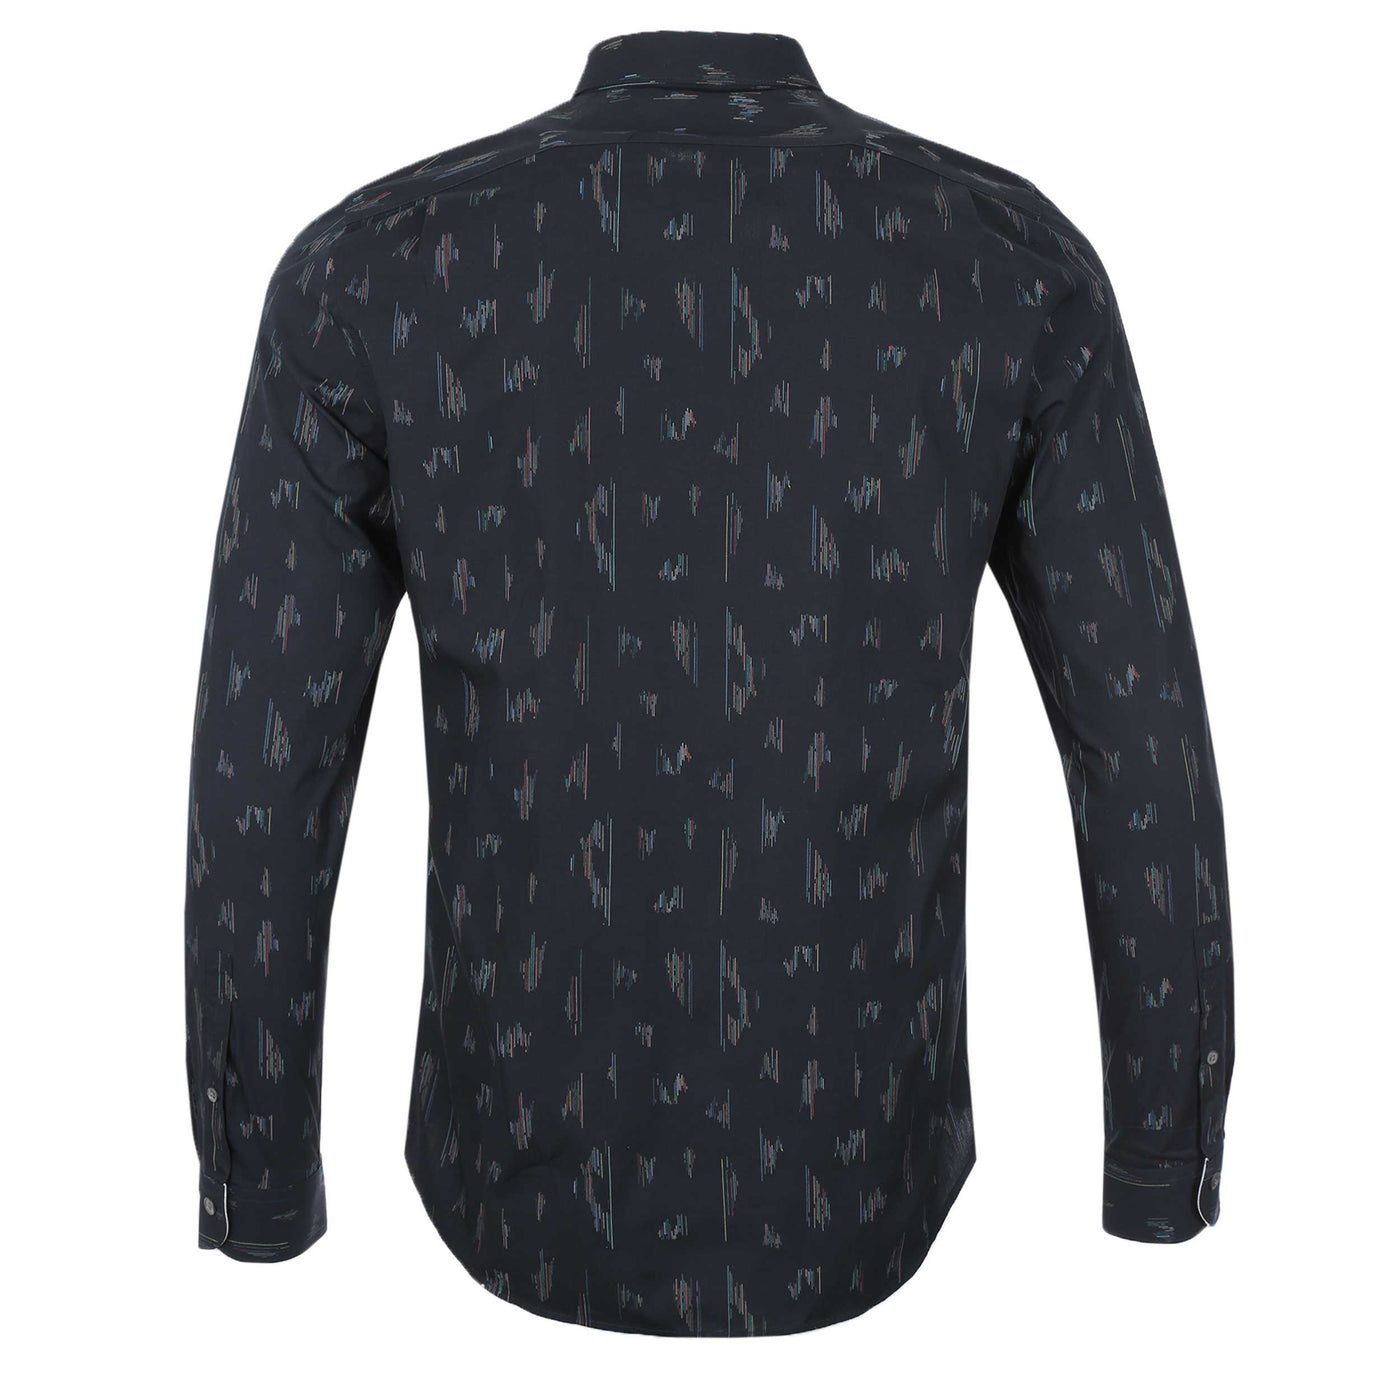 Paul Smith Tailored Fit Shirt in Black Back